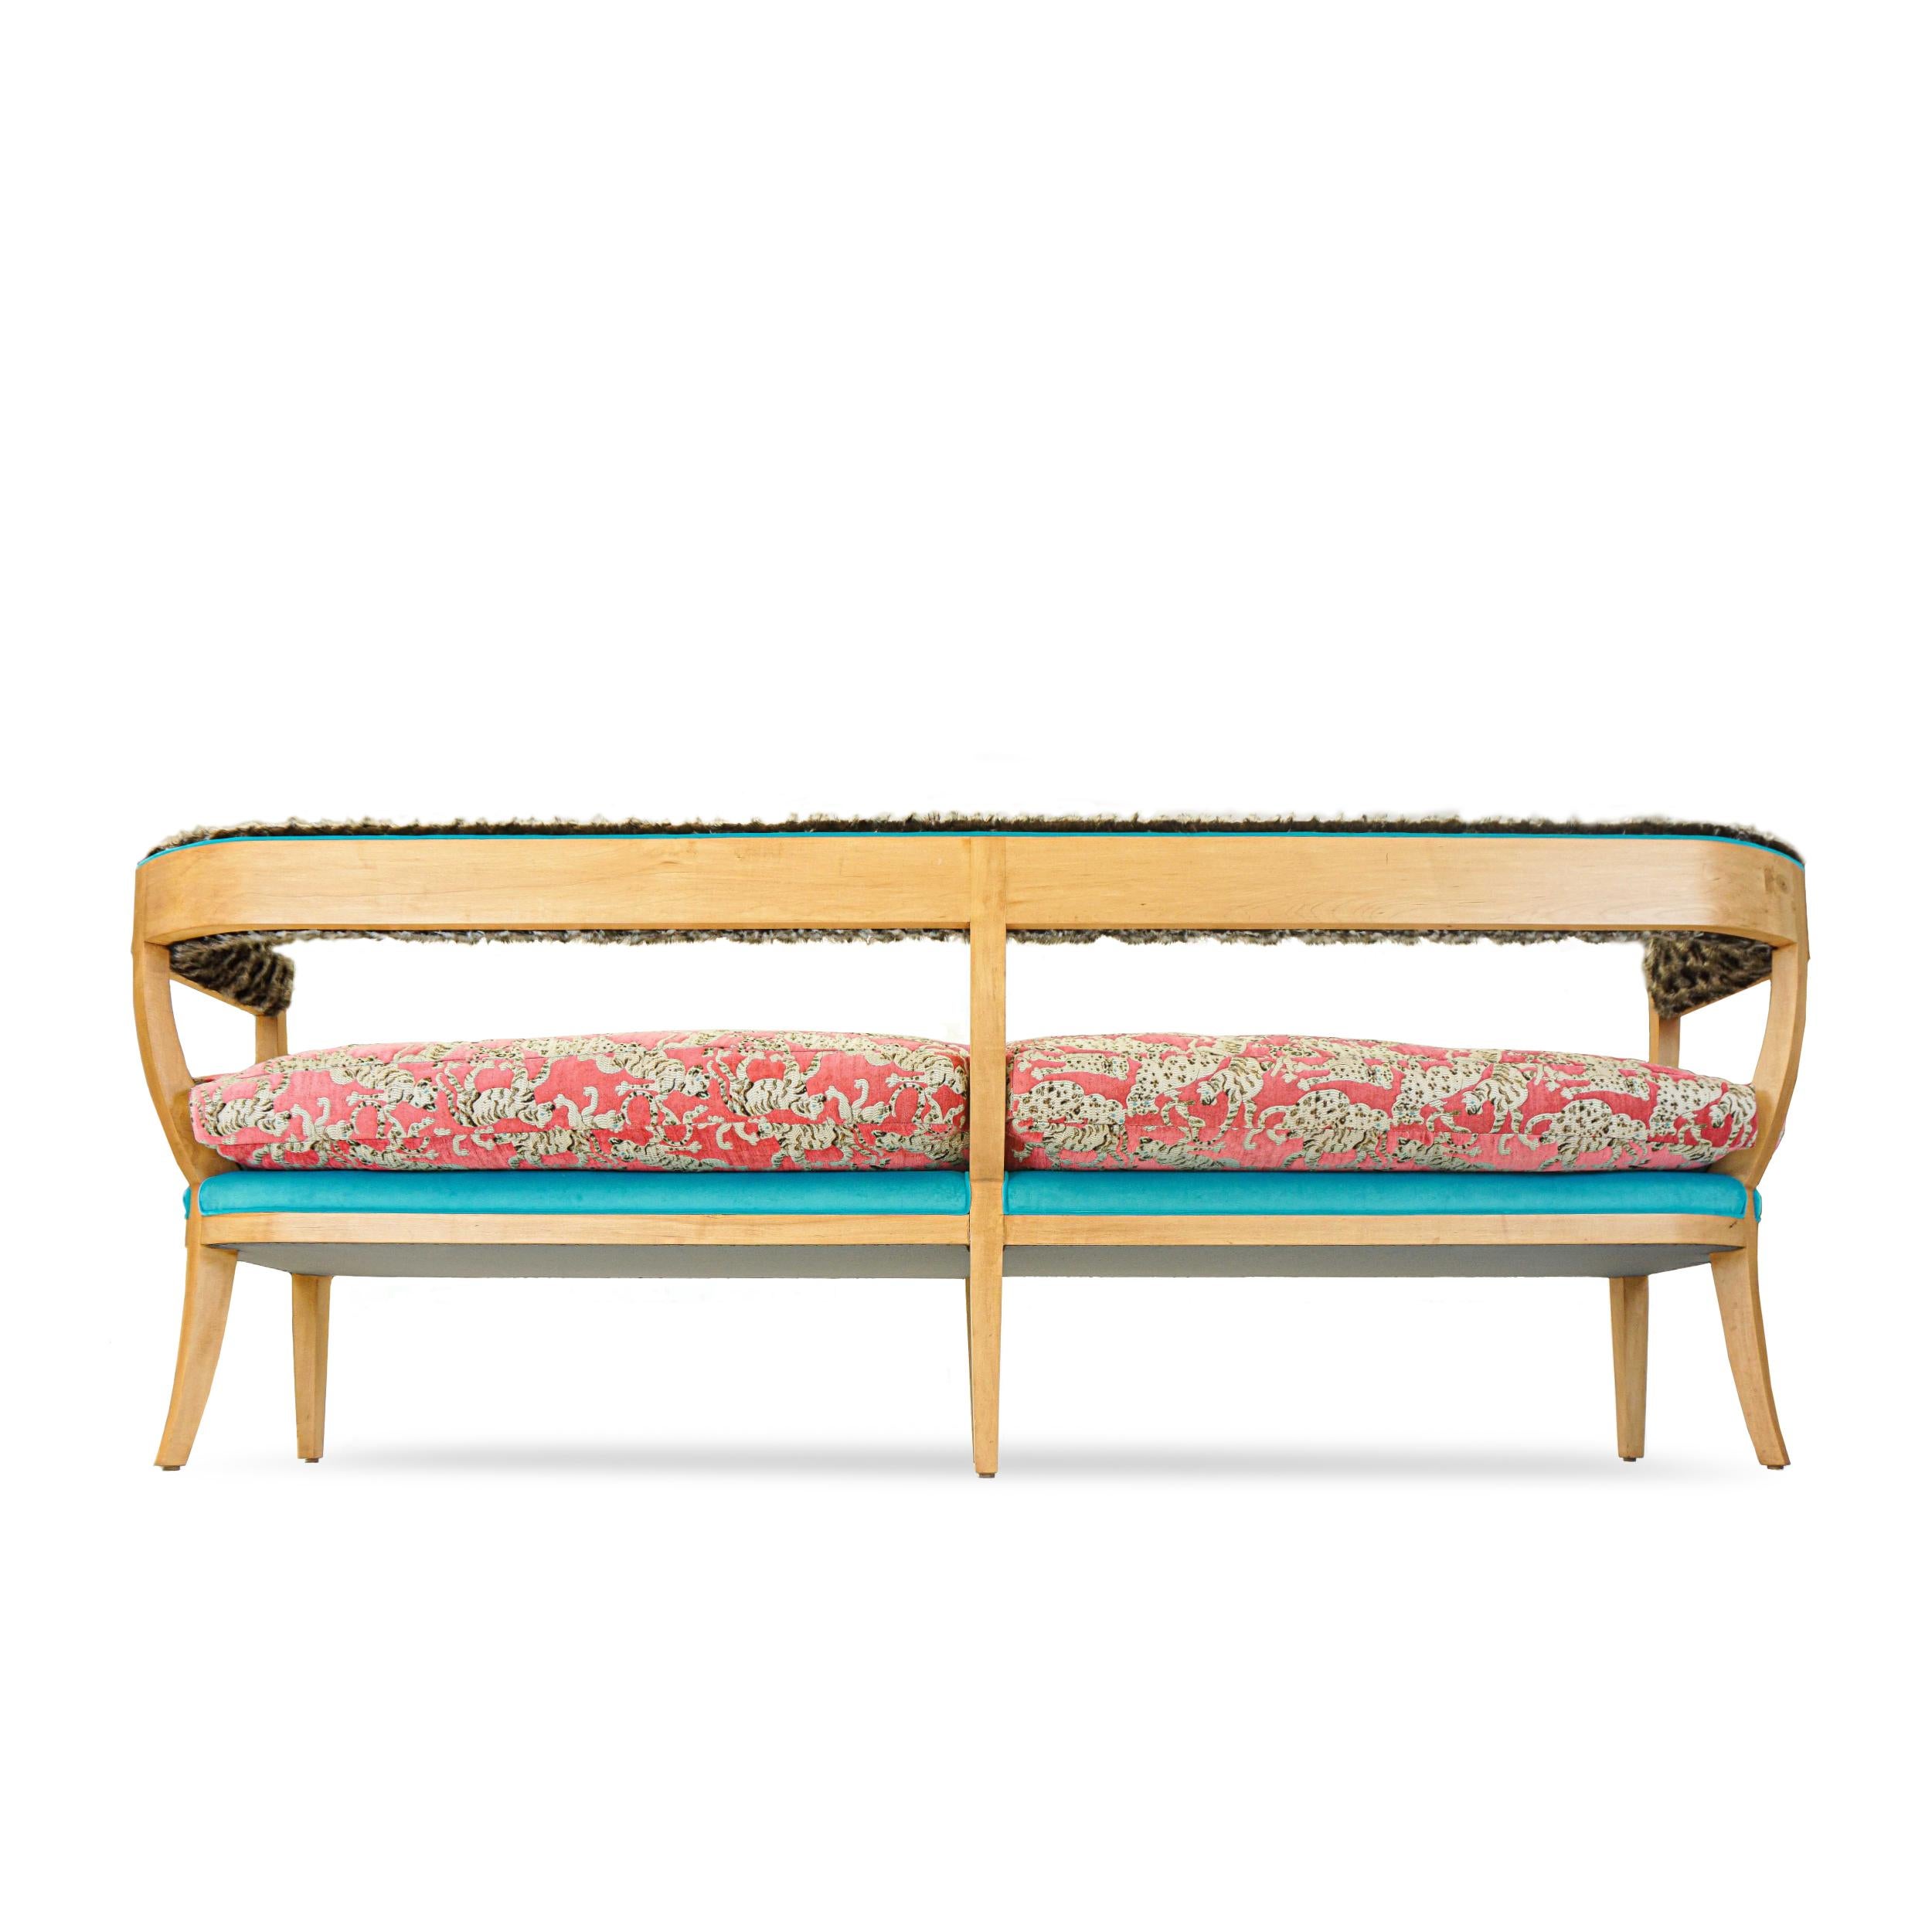 Velvet Japanese Inspired Bench with Wild Cat Print and Faux Fur For Sale